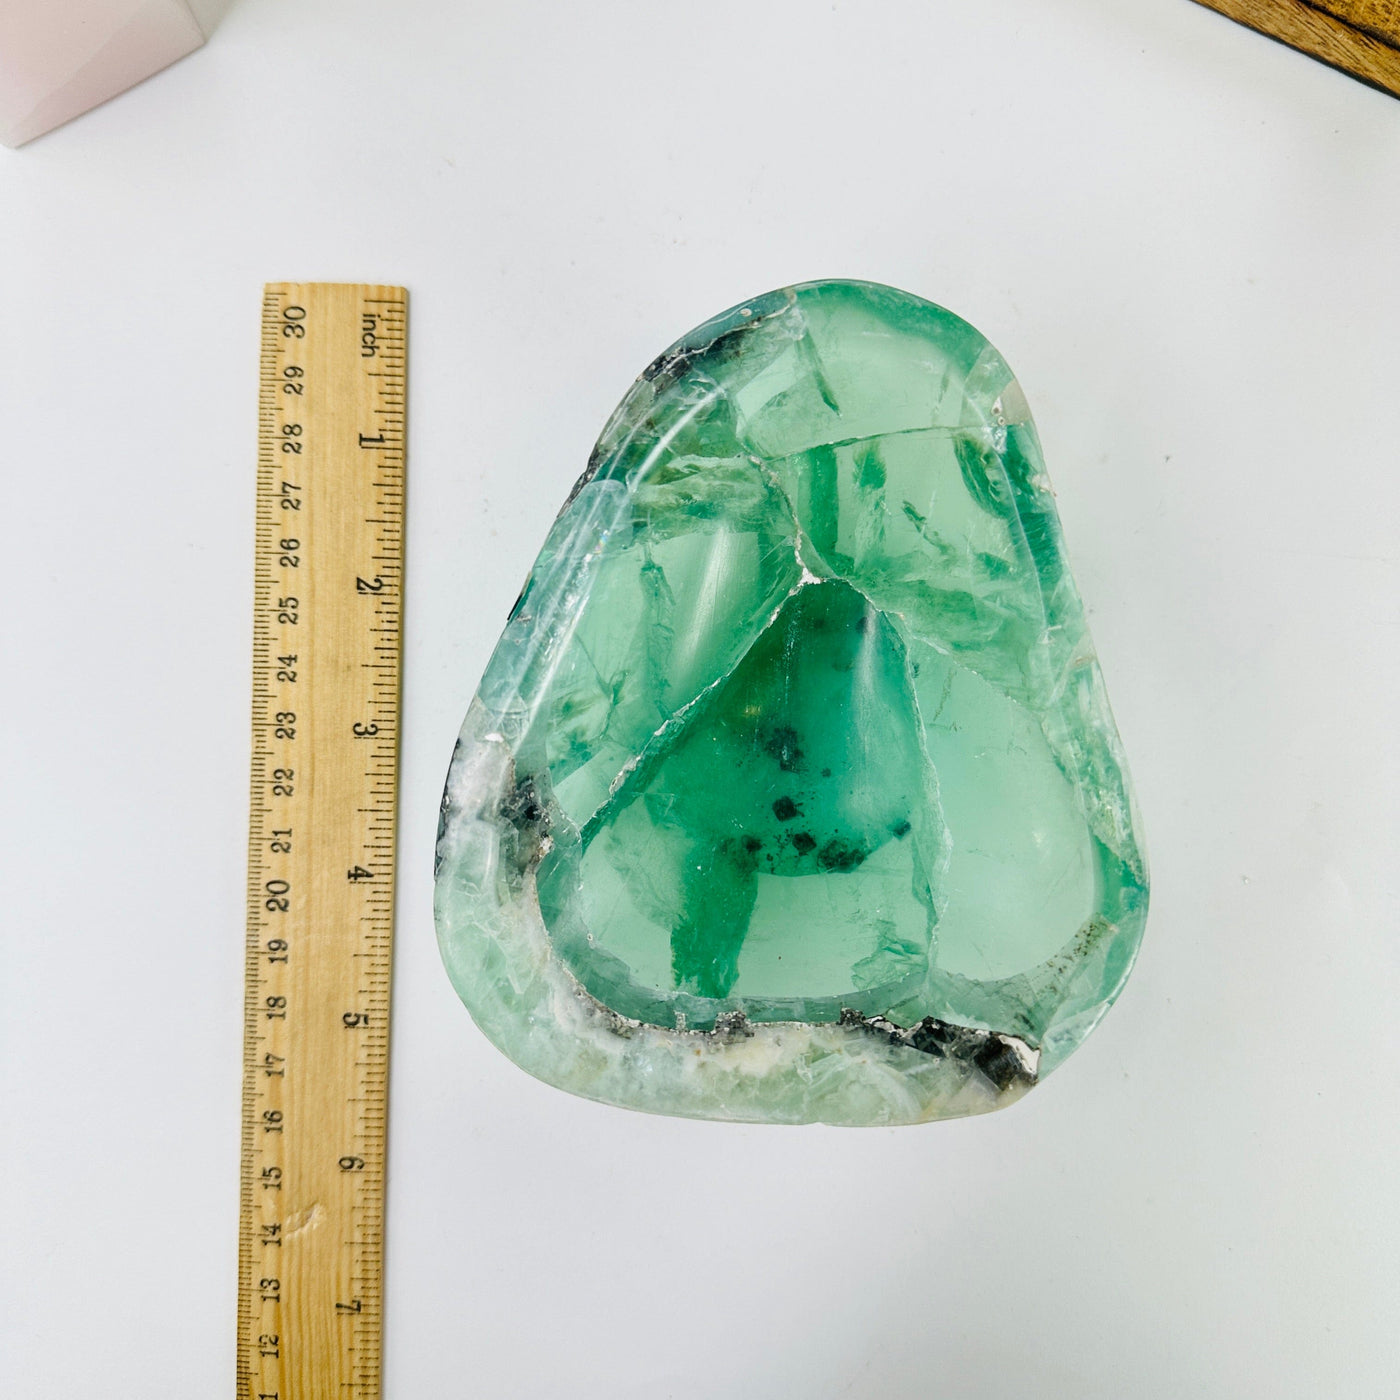 fluorite bowl next to a ruler for size reference